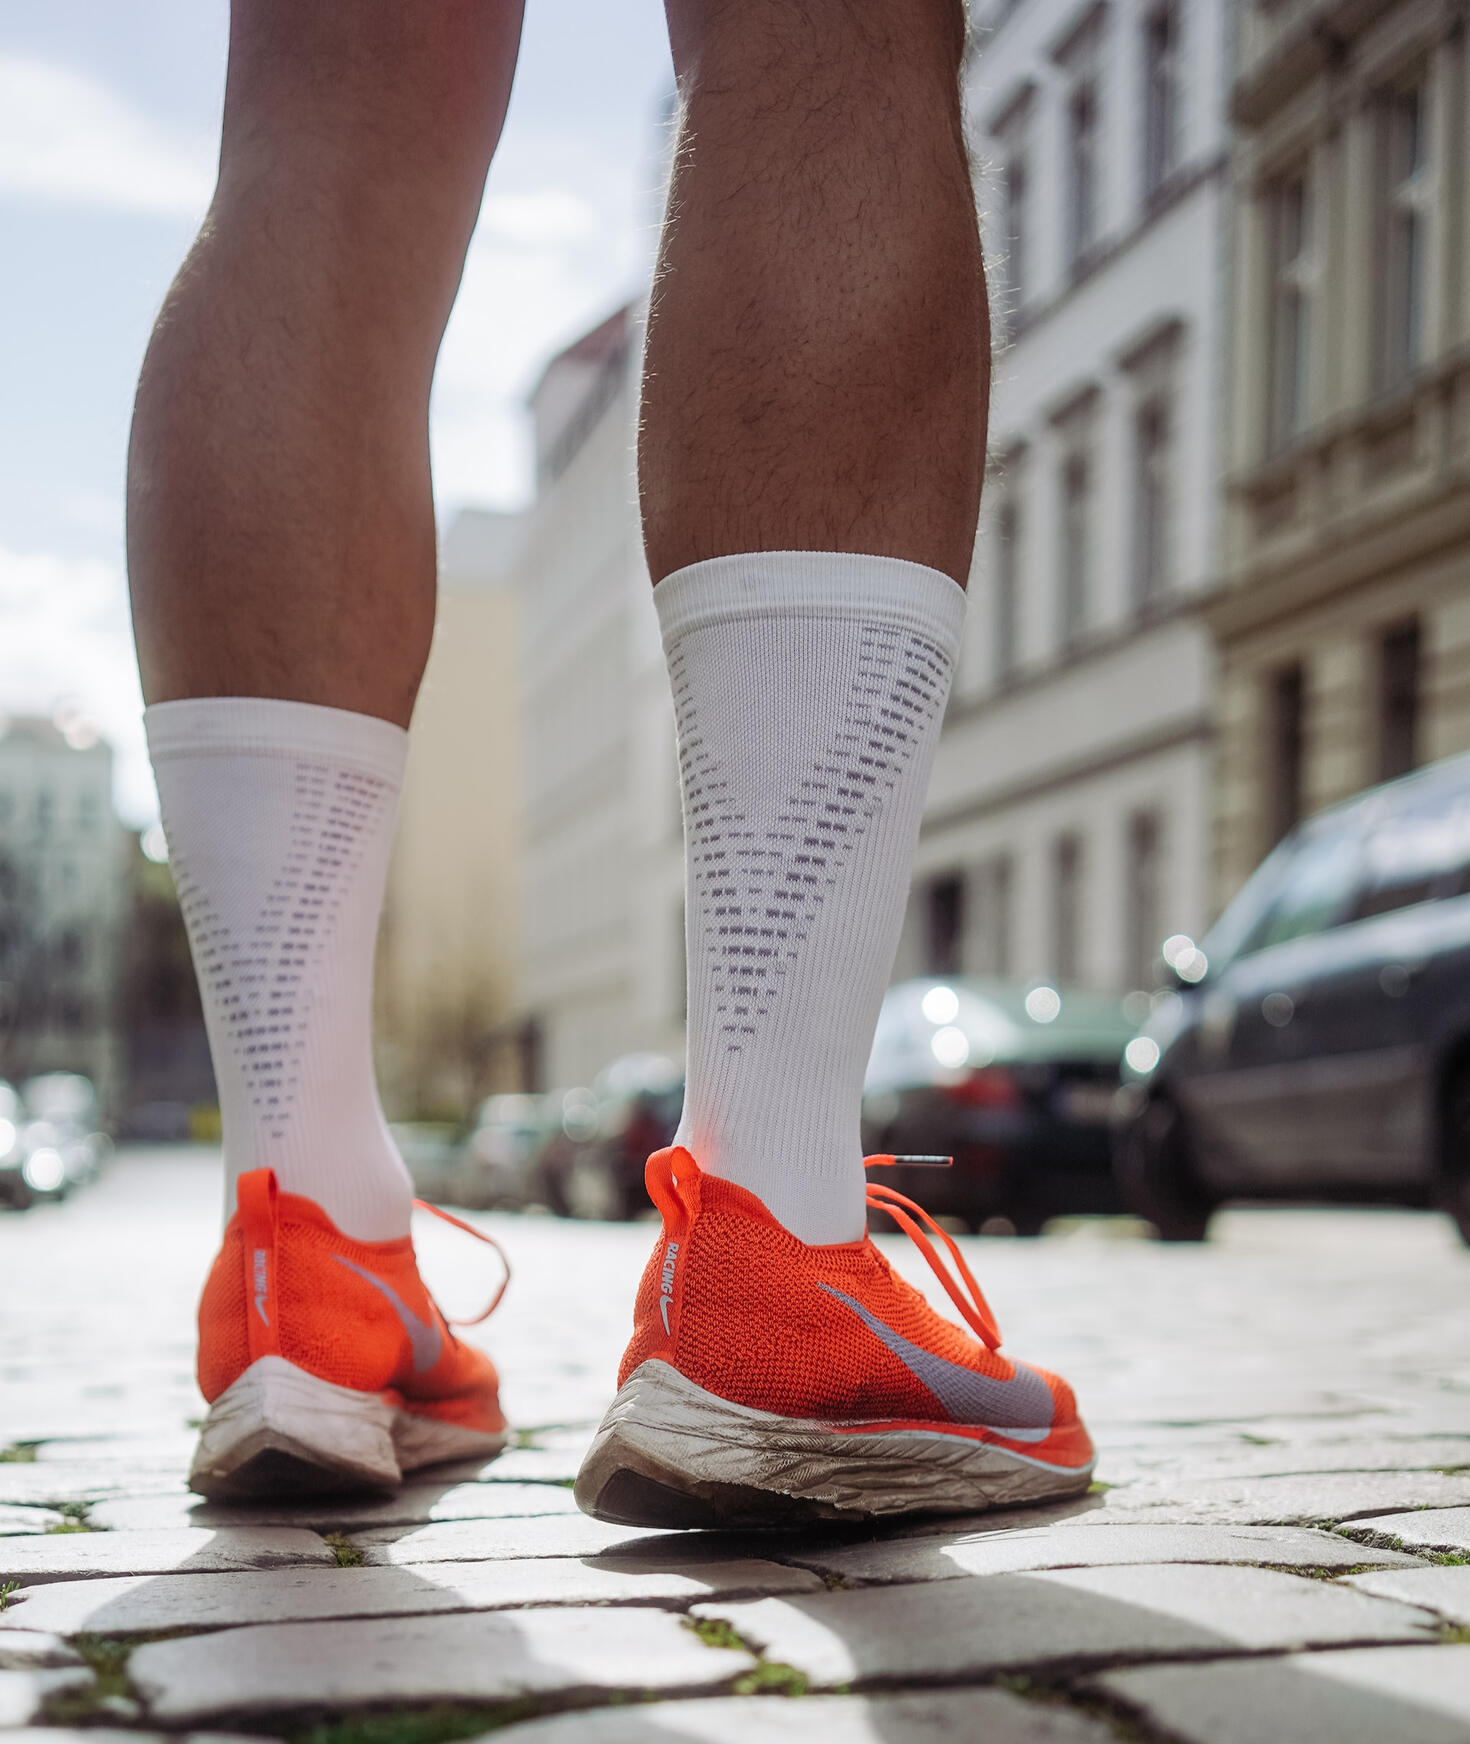 Photo of person wearing orange Nike running shoes standing on pavement, by Florian Kurrasch on Unsplash